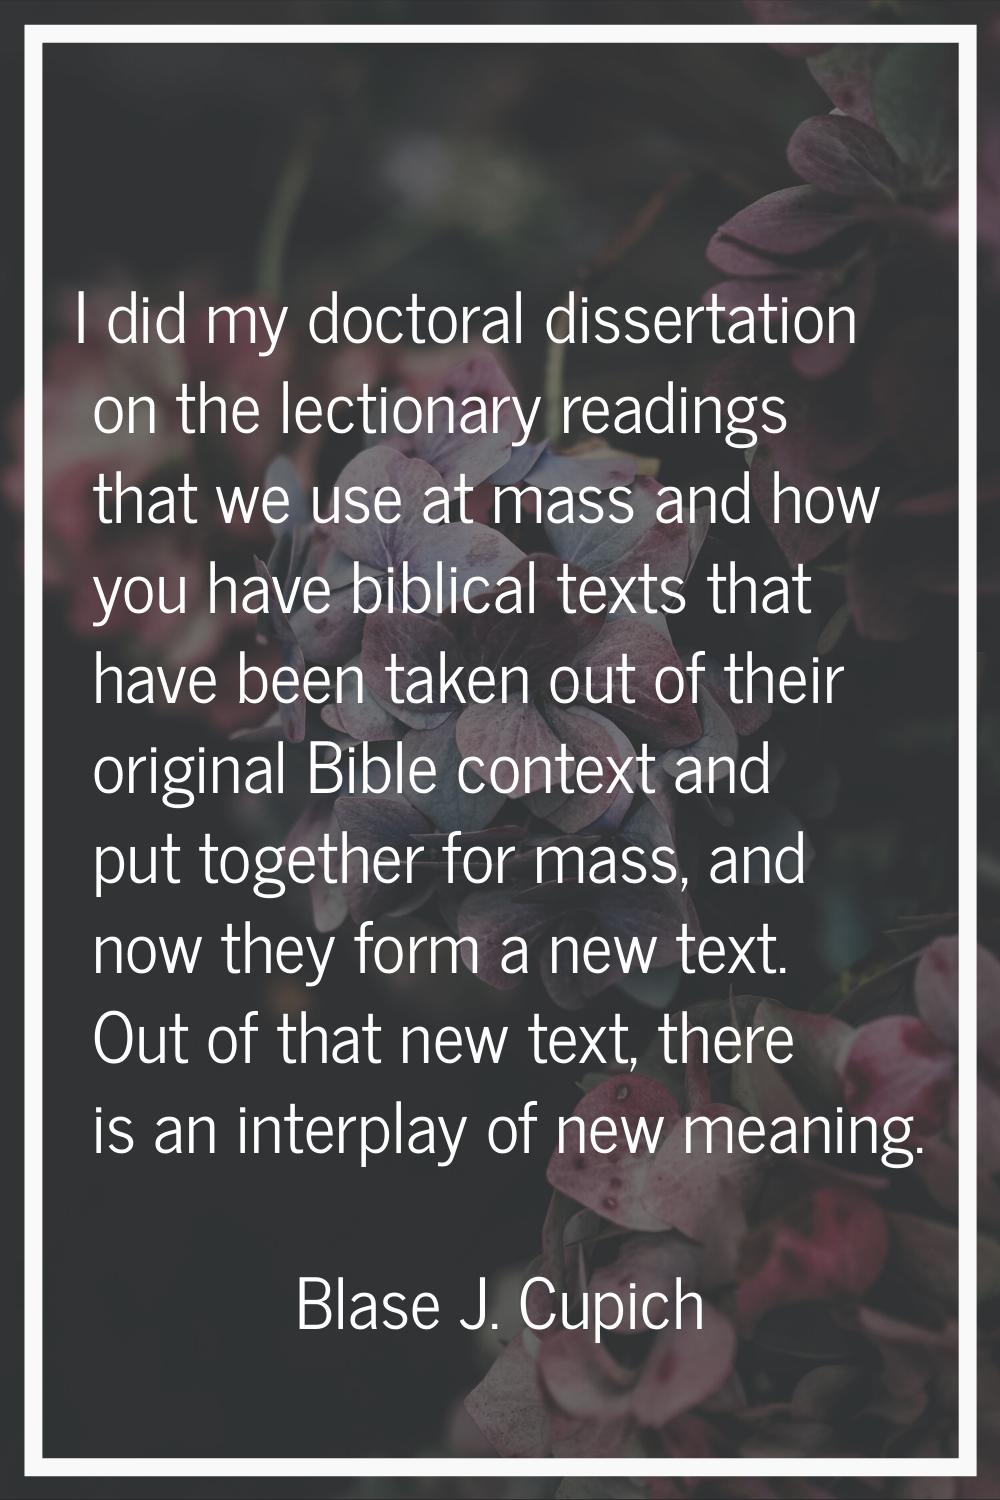 I did my doctoral dissertation on the lectionary readings that we use at mass and how you have bibl